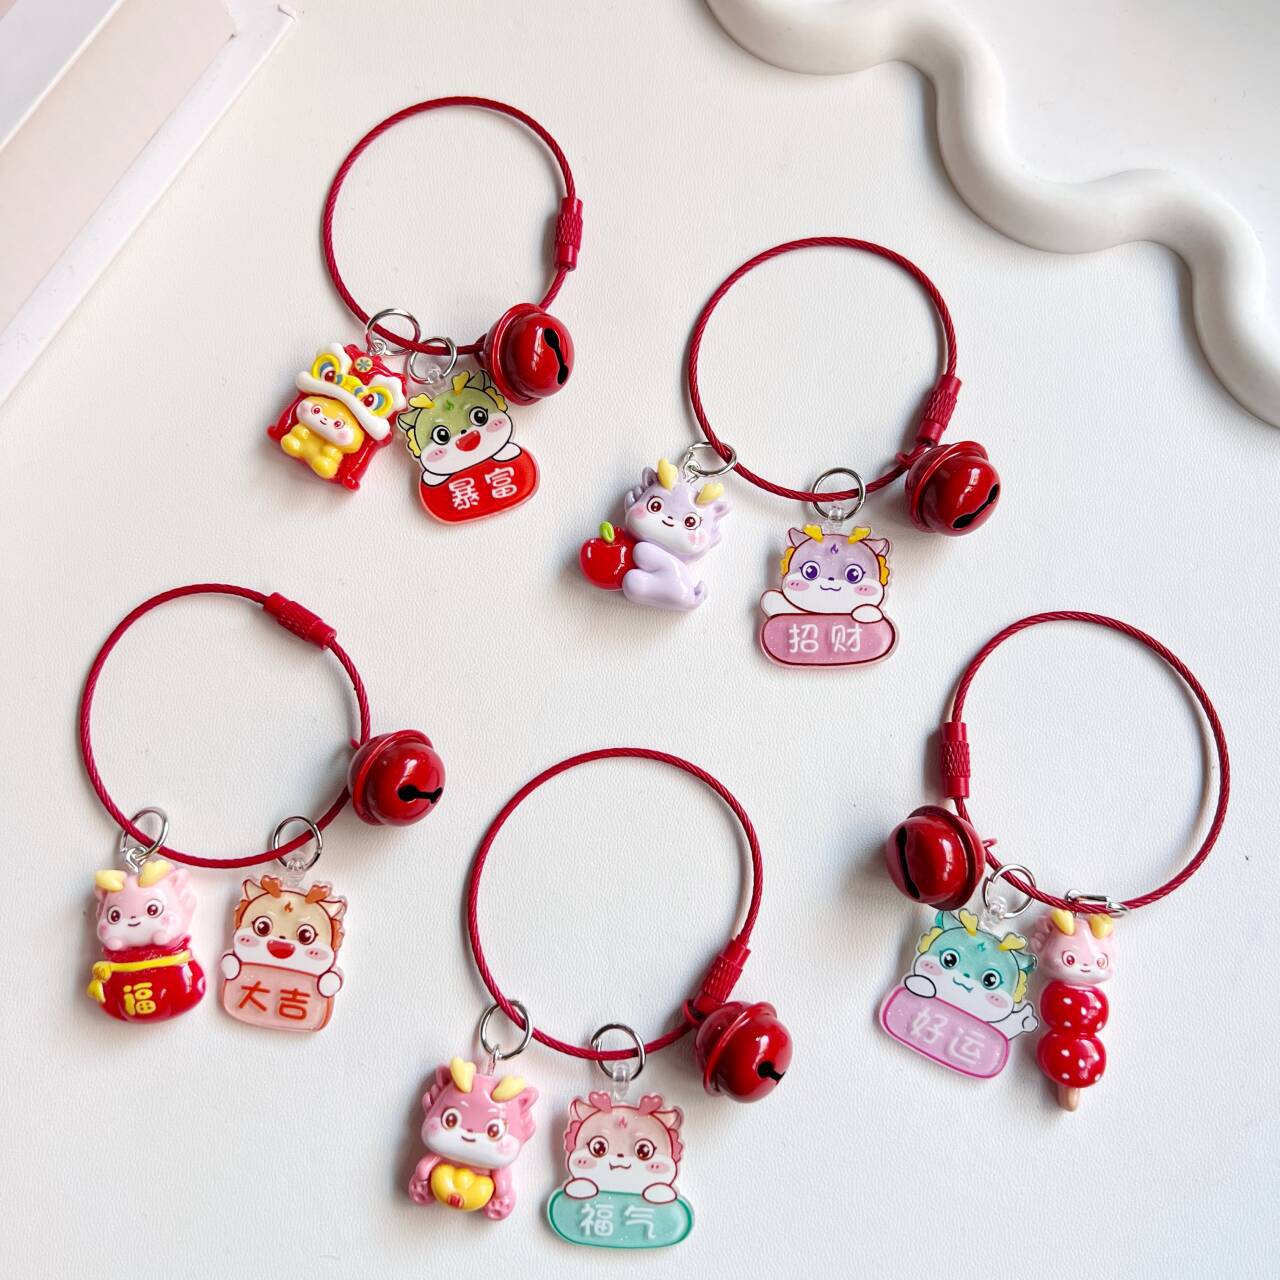 National Tide Lion Dragon Year Keychain Pendant Rich Cute Red Personality Bag in New Year Gift and Ornament